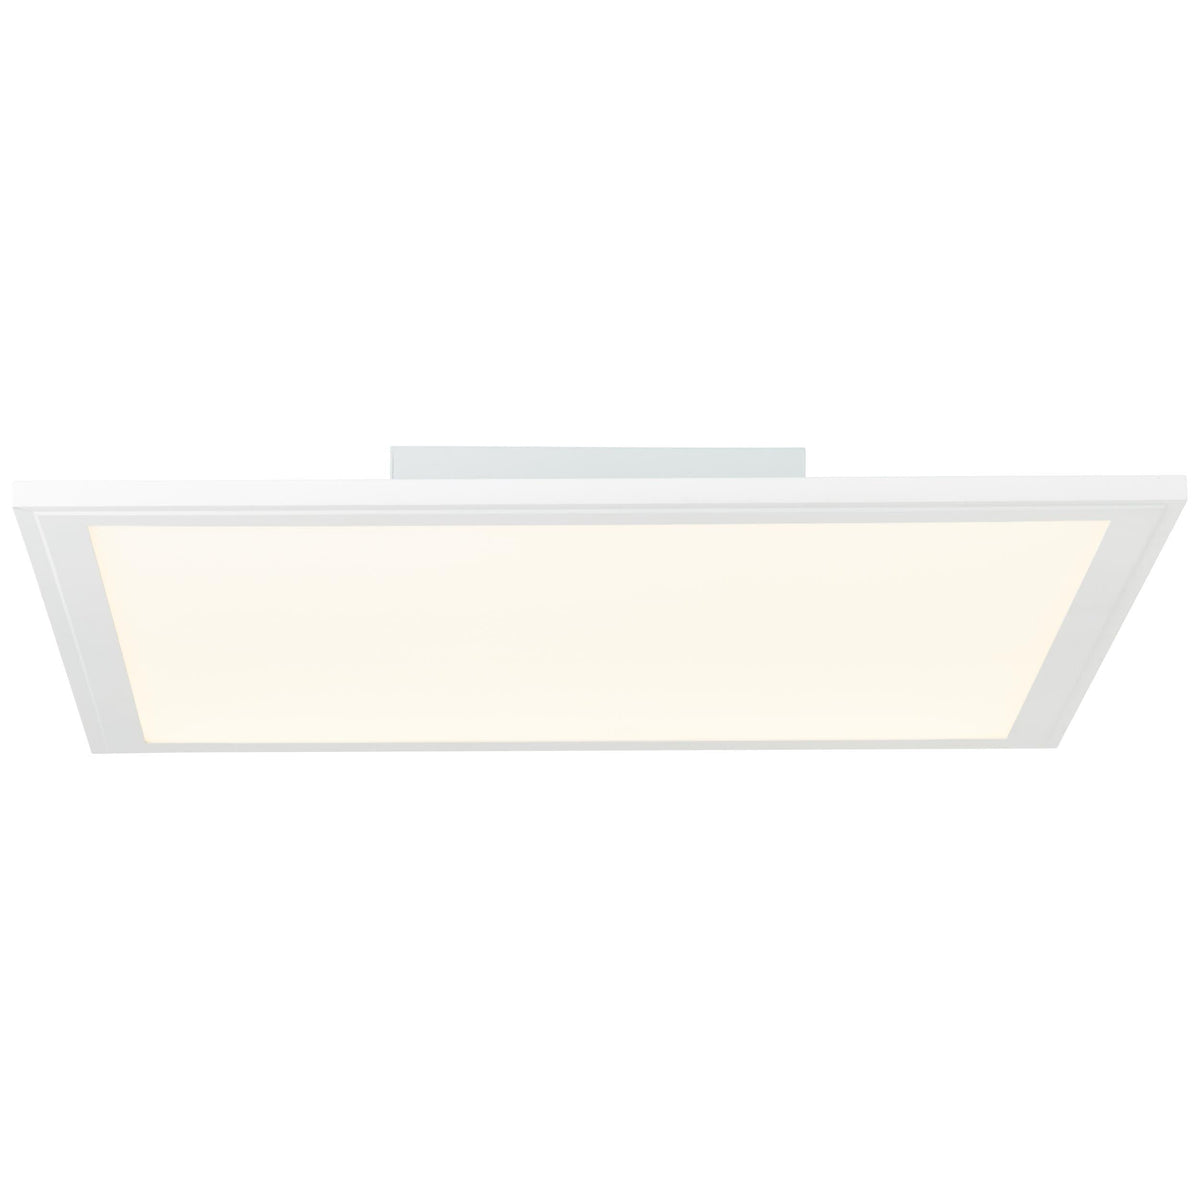 Brilliant 1 Light 24W Abie LED Square Ceiling Panel - White | G90318/05 from DID Electrical - guaranteed Irish, guaranteed quality service. (6977602060476)